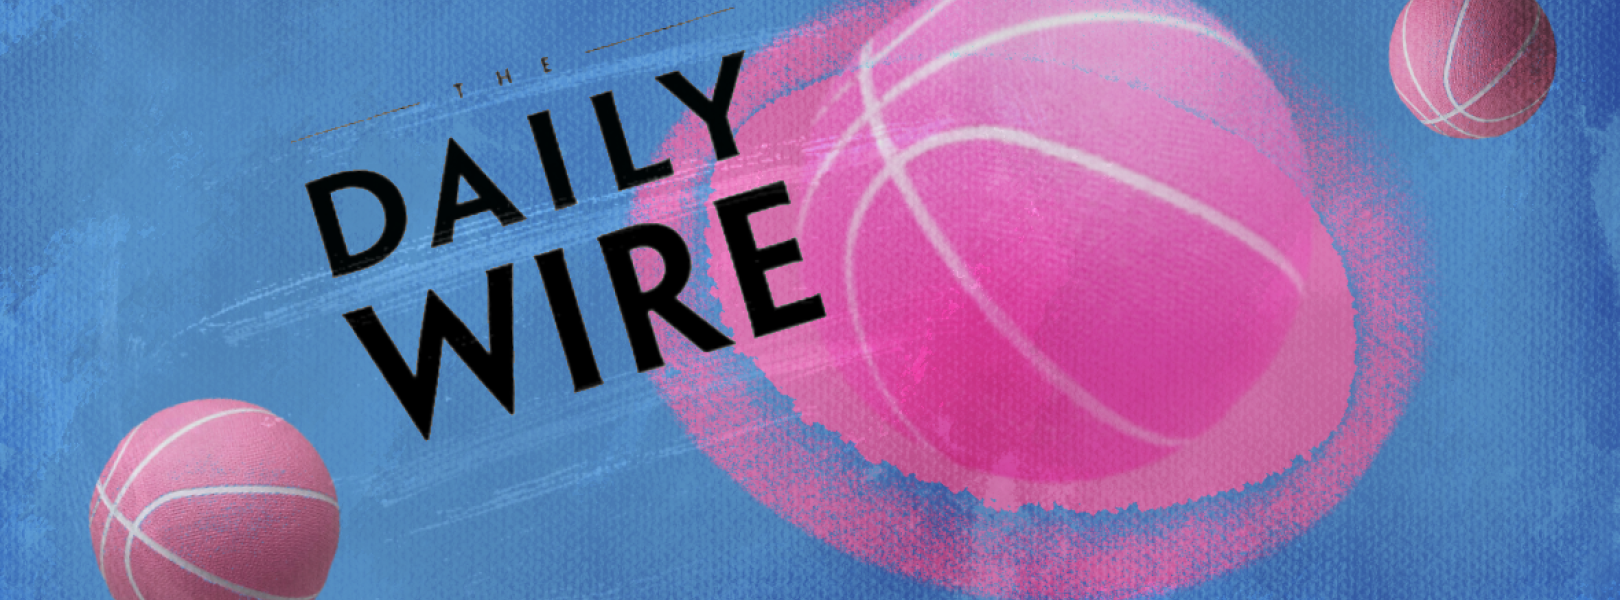 Pink basketballs on a blue field with the Daily Wire's logo in the foreground in black.